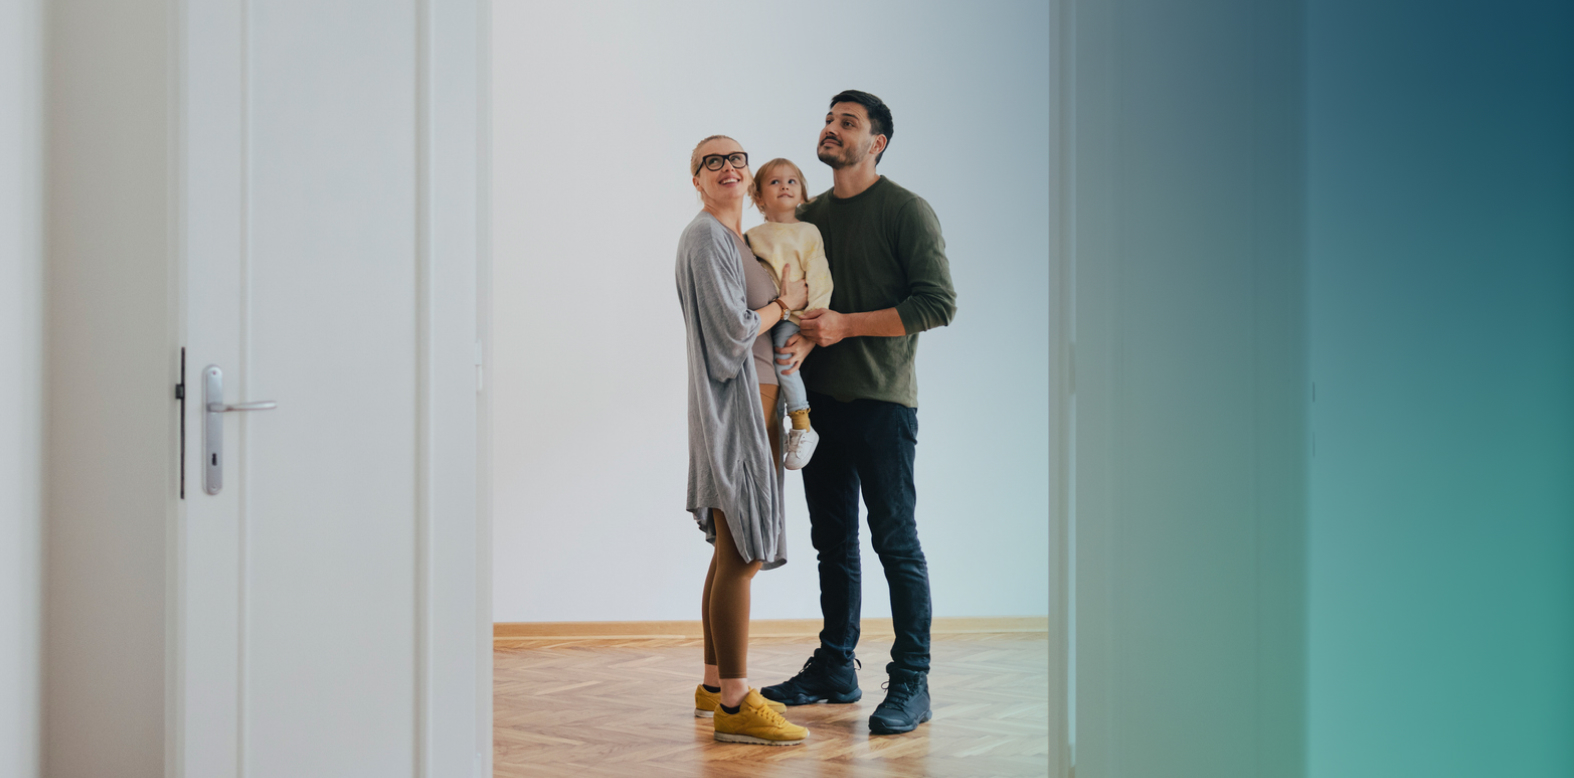 Young family in a room smiling